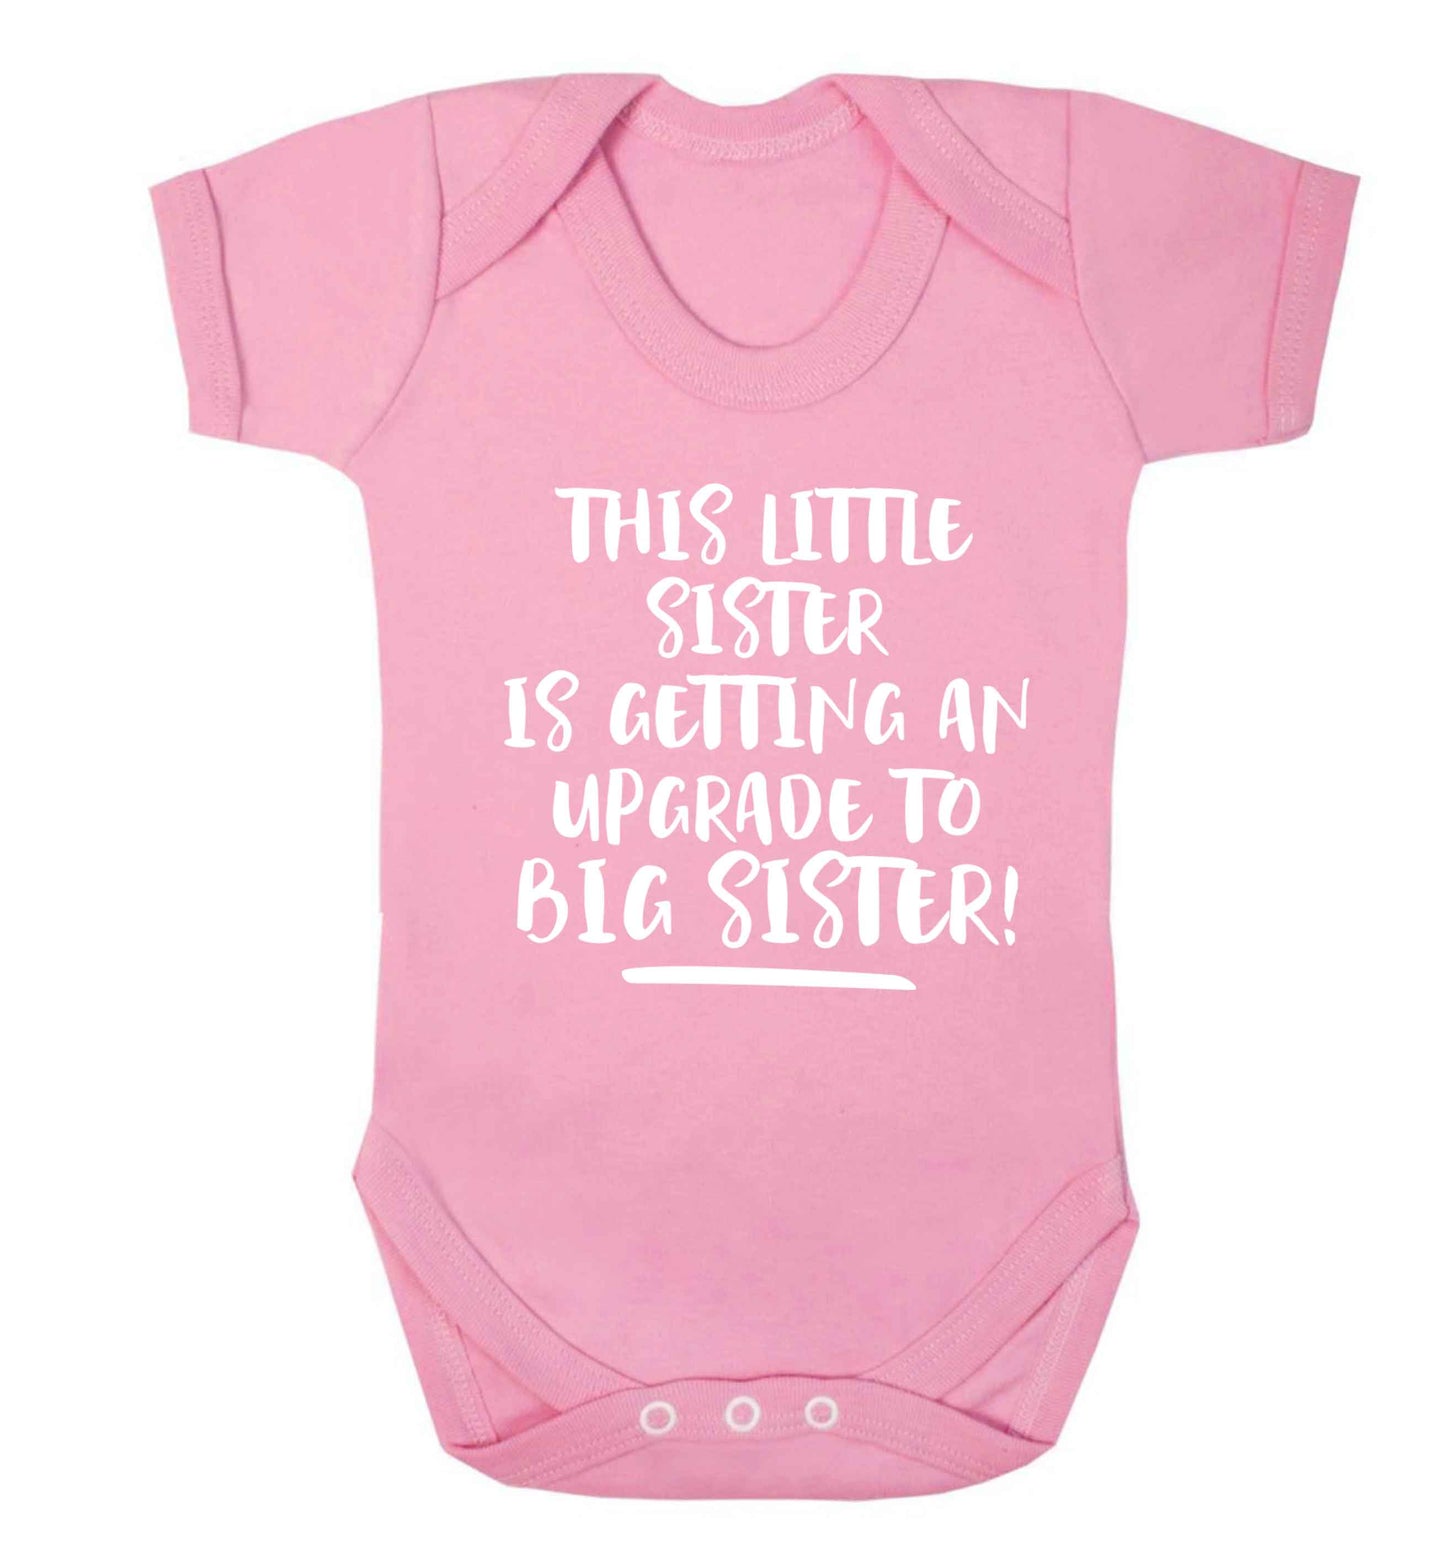 This little sister is getting an upgrade to big sister! Baby Vest pale pink 18-24 months